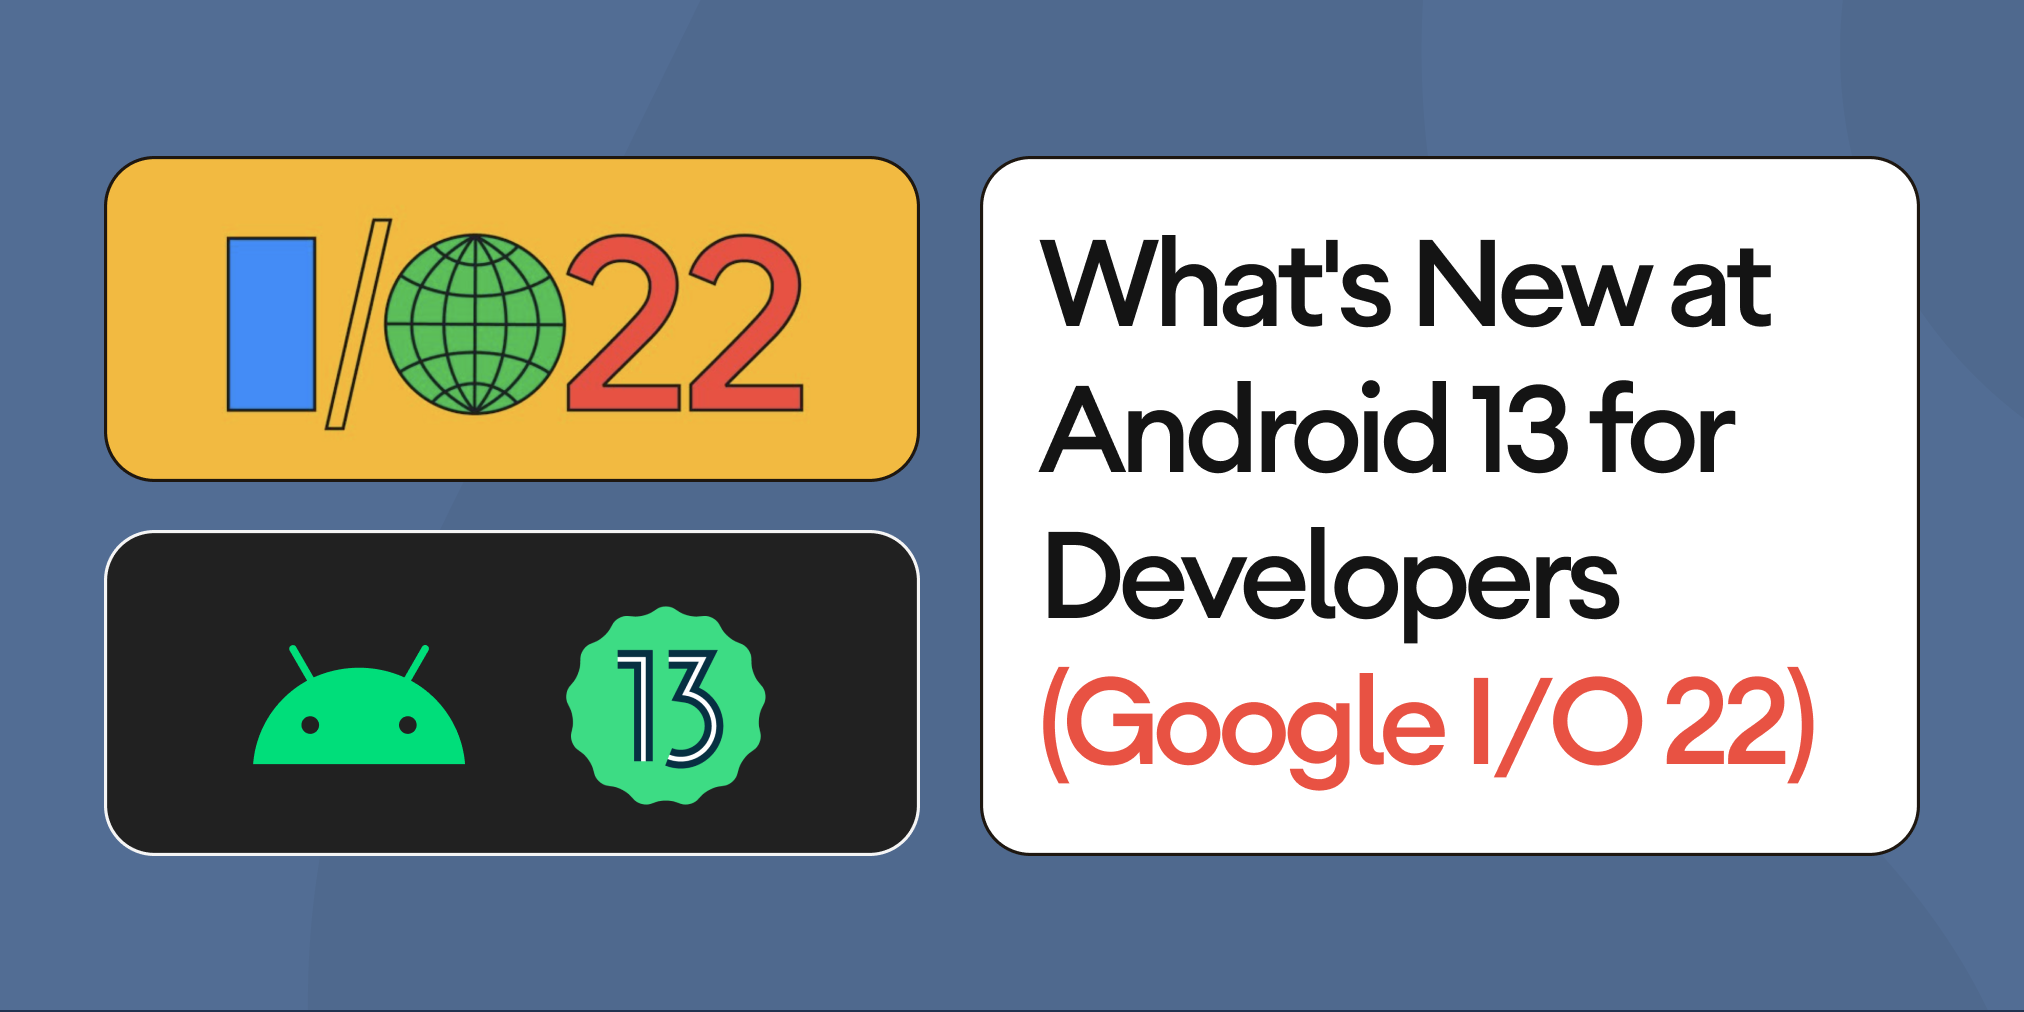 What’s New at Android 13 for Developers (Google I/O 2022)